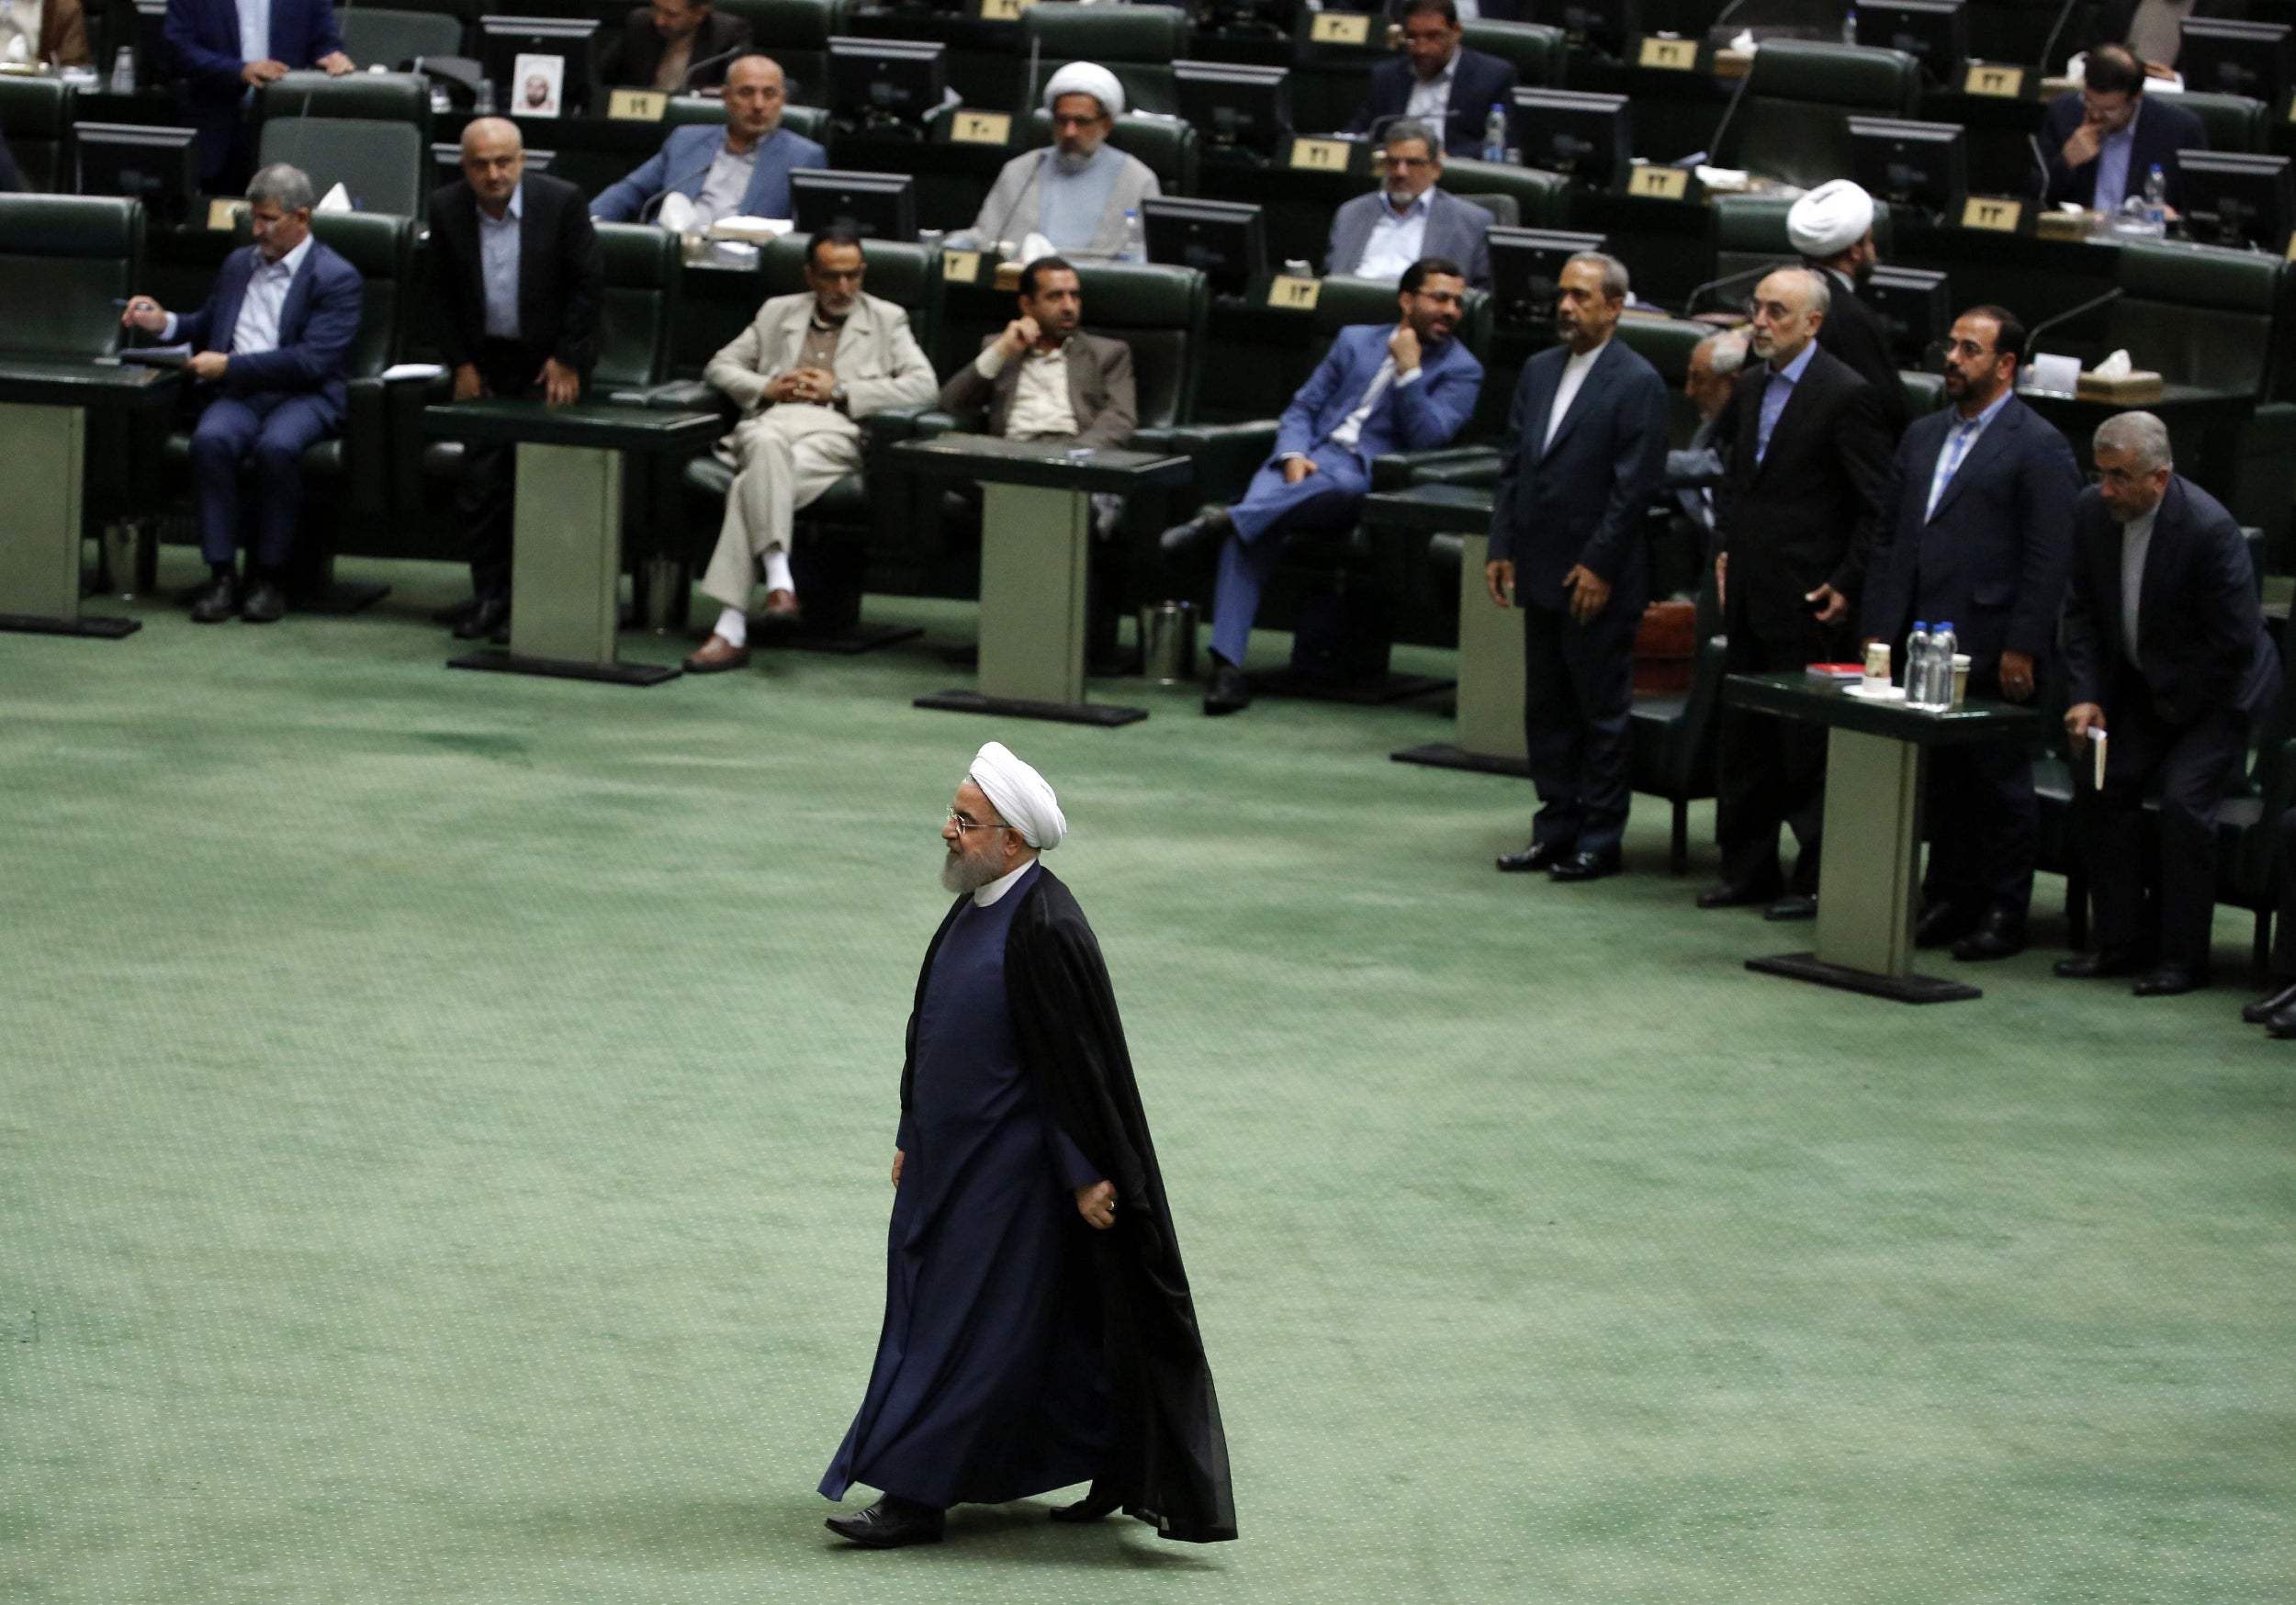 Mr Rouhani was summoned before parliament today for the first time in his five years in office